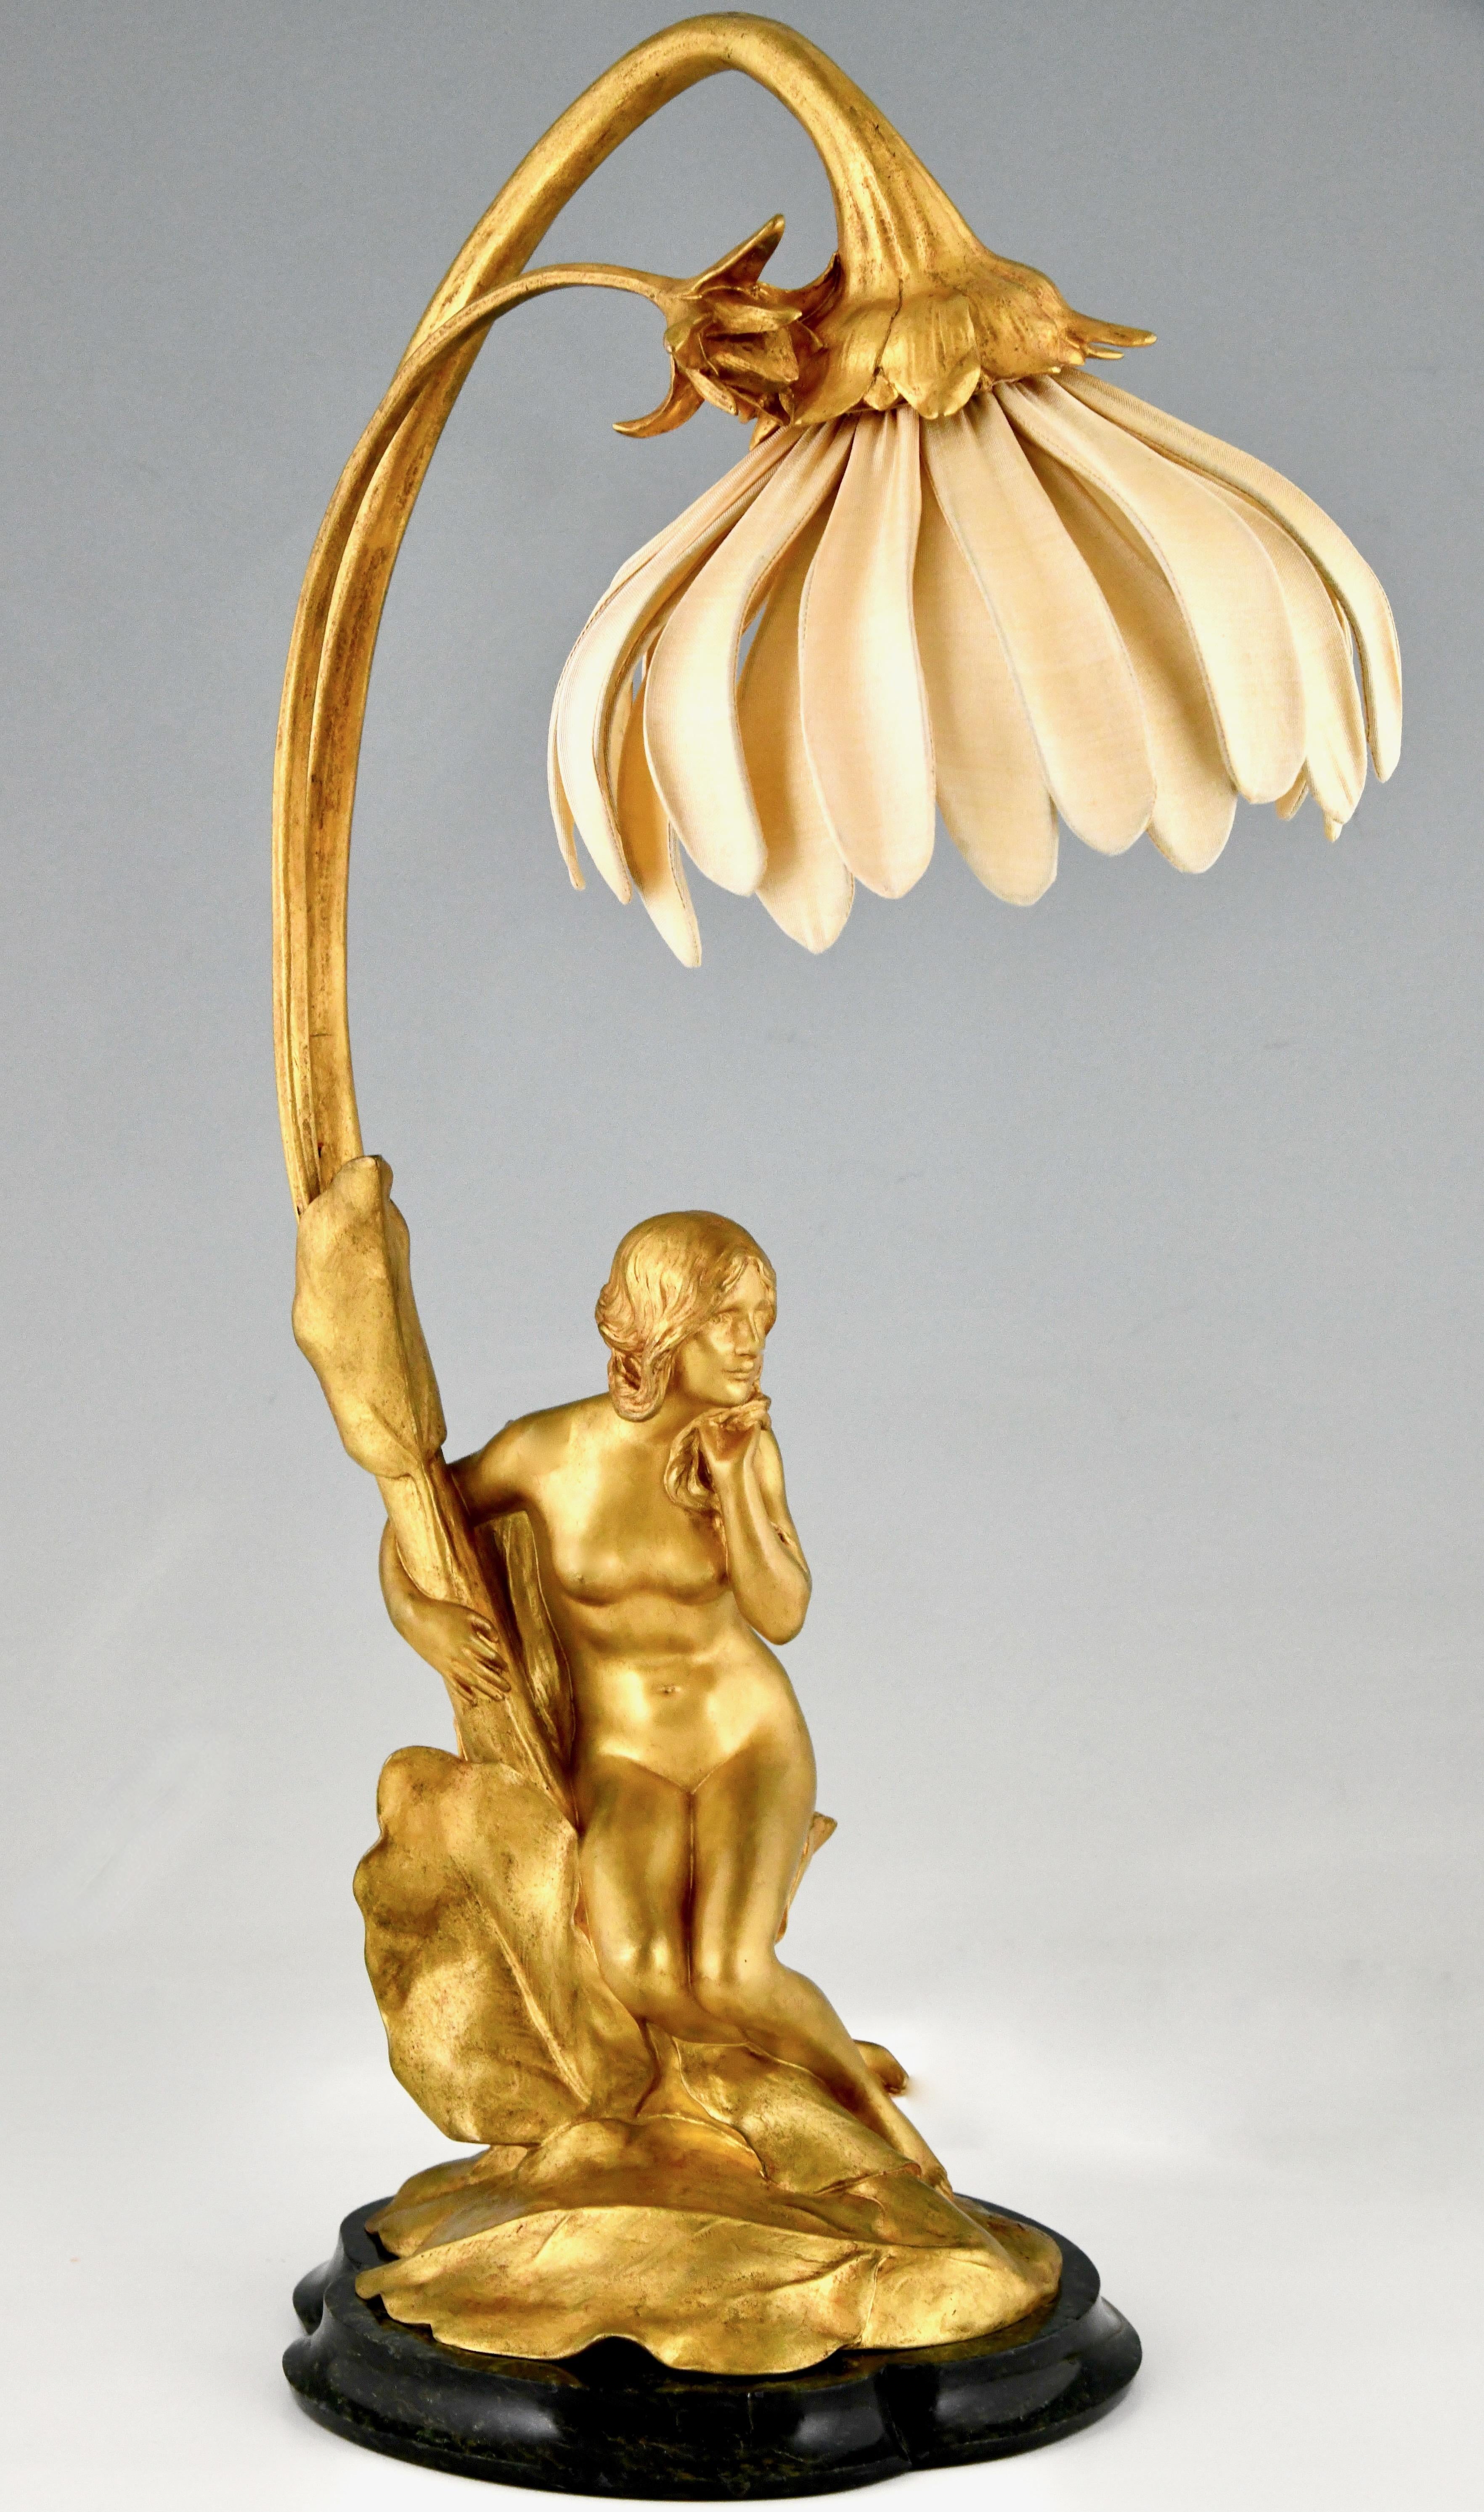 Art Nouveau gilt bronze lamp with nude by Maurice Bouval, France 1906.
With the foundry seal of Jollet & Cie, Colin.
Gilt bronze on a marble base with a silk shade in the shape of a flower. 
This model is illustrated in
Dynamic Beauty, Macklowe